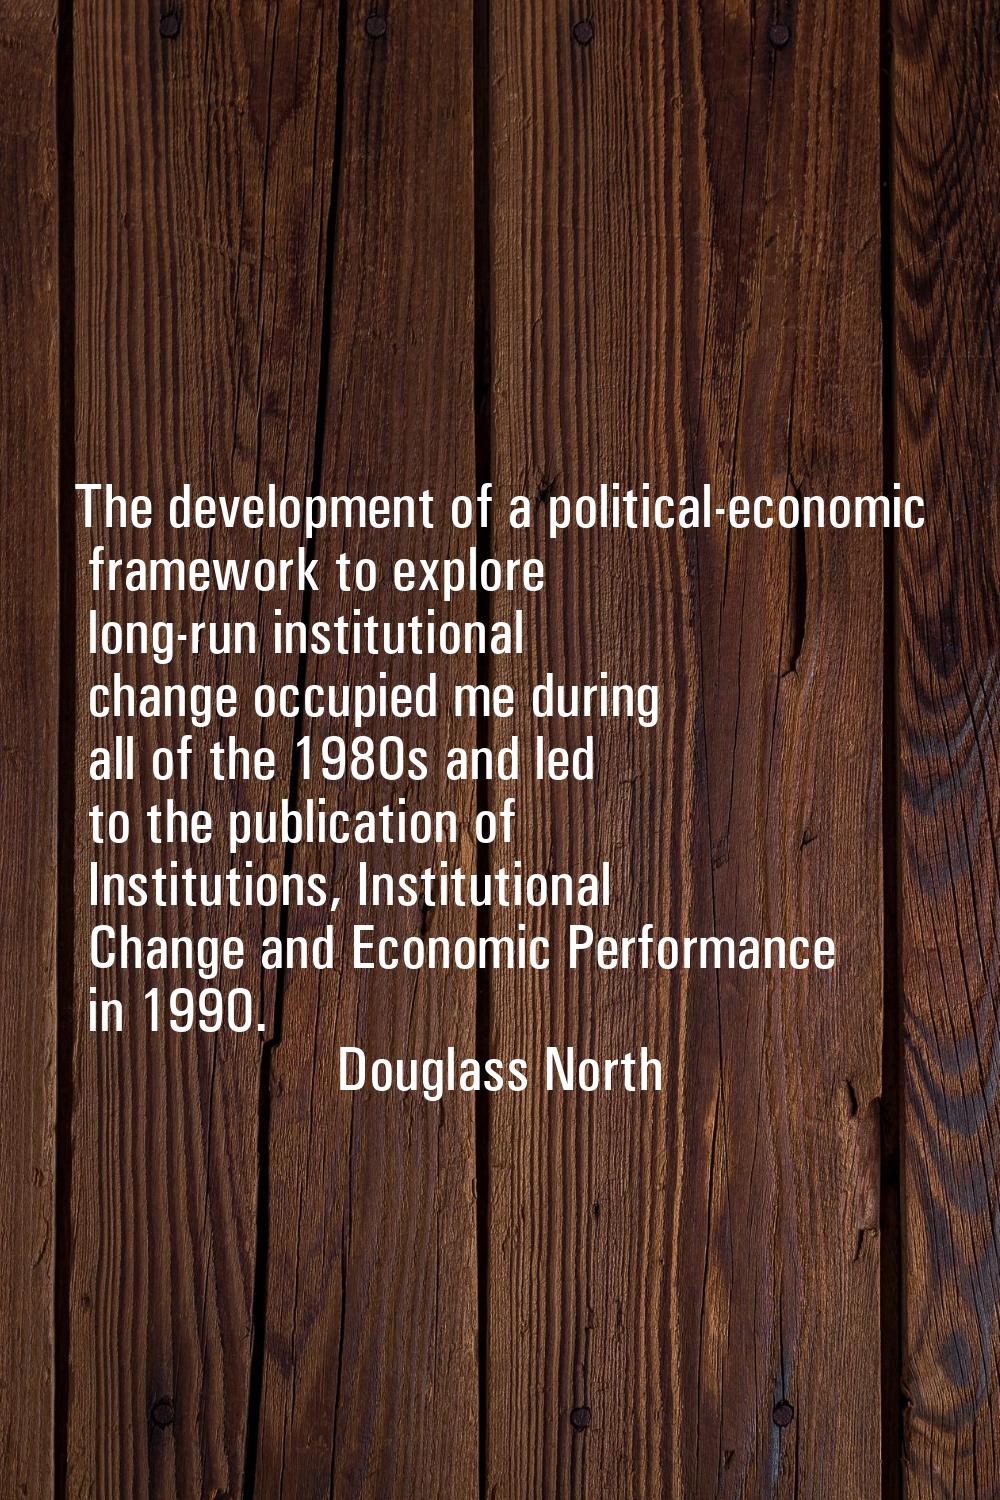 The development of a political-economic framework to explore long-run institutional change occupied